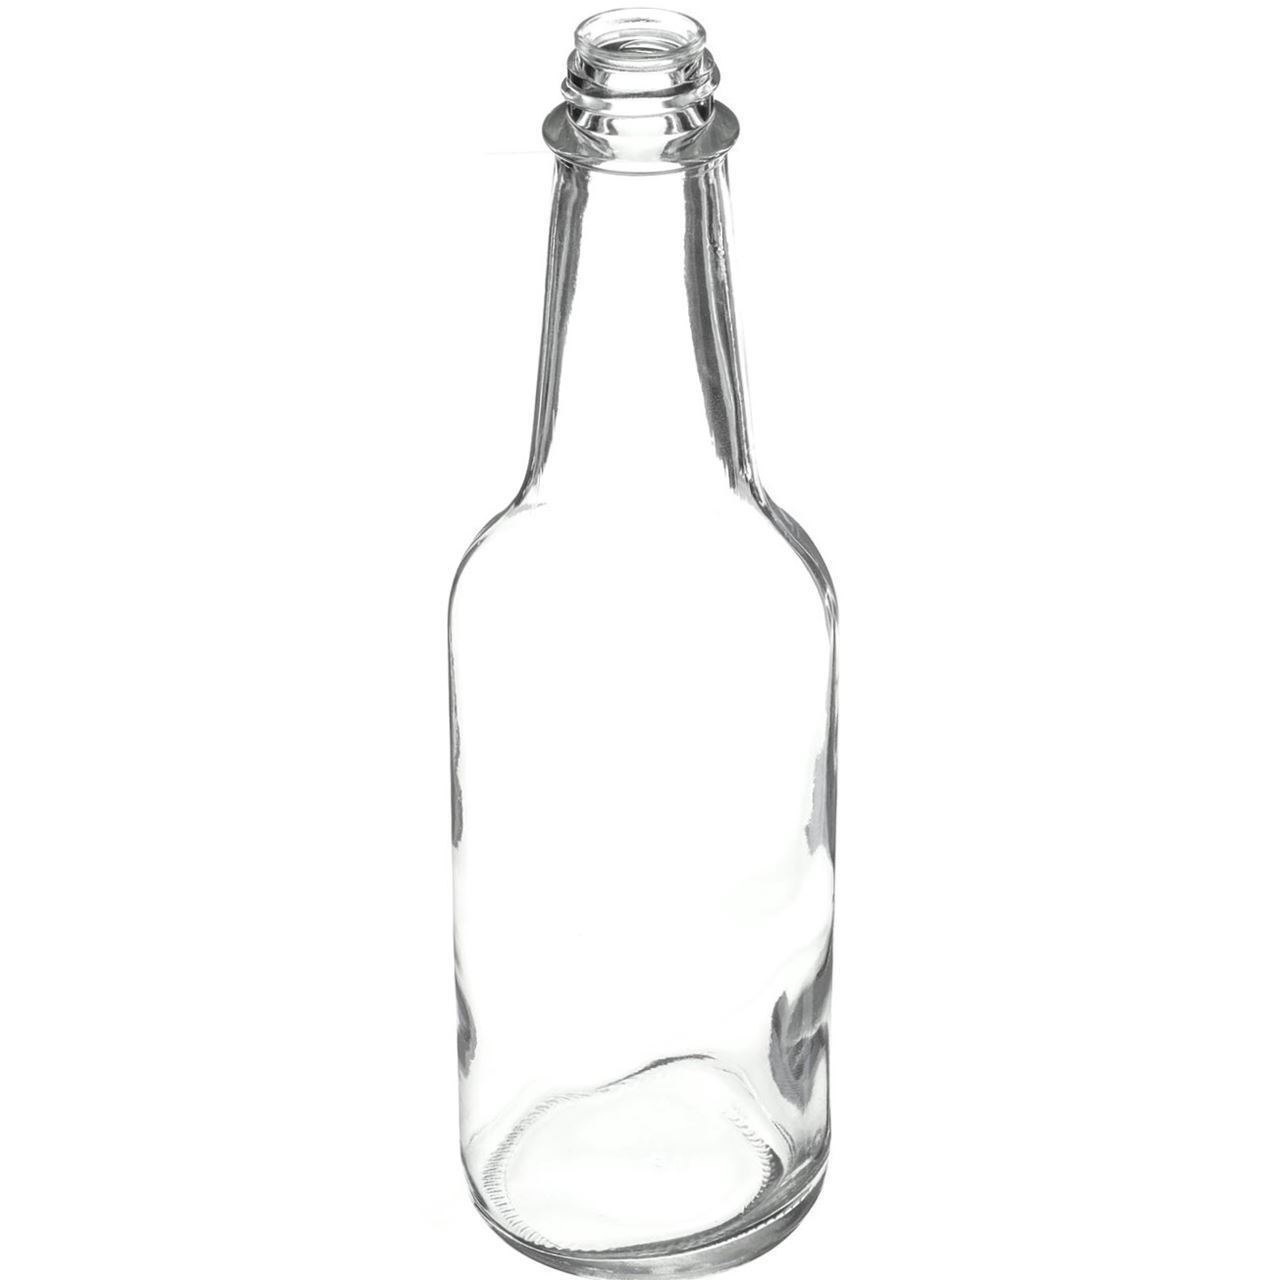 https://tricorbraun.ca/content/images/thumbs/0015054_10-oz-clear-glass-woozy-bottle-24-414-neck-finish-round-base.jpeg